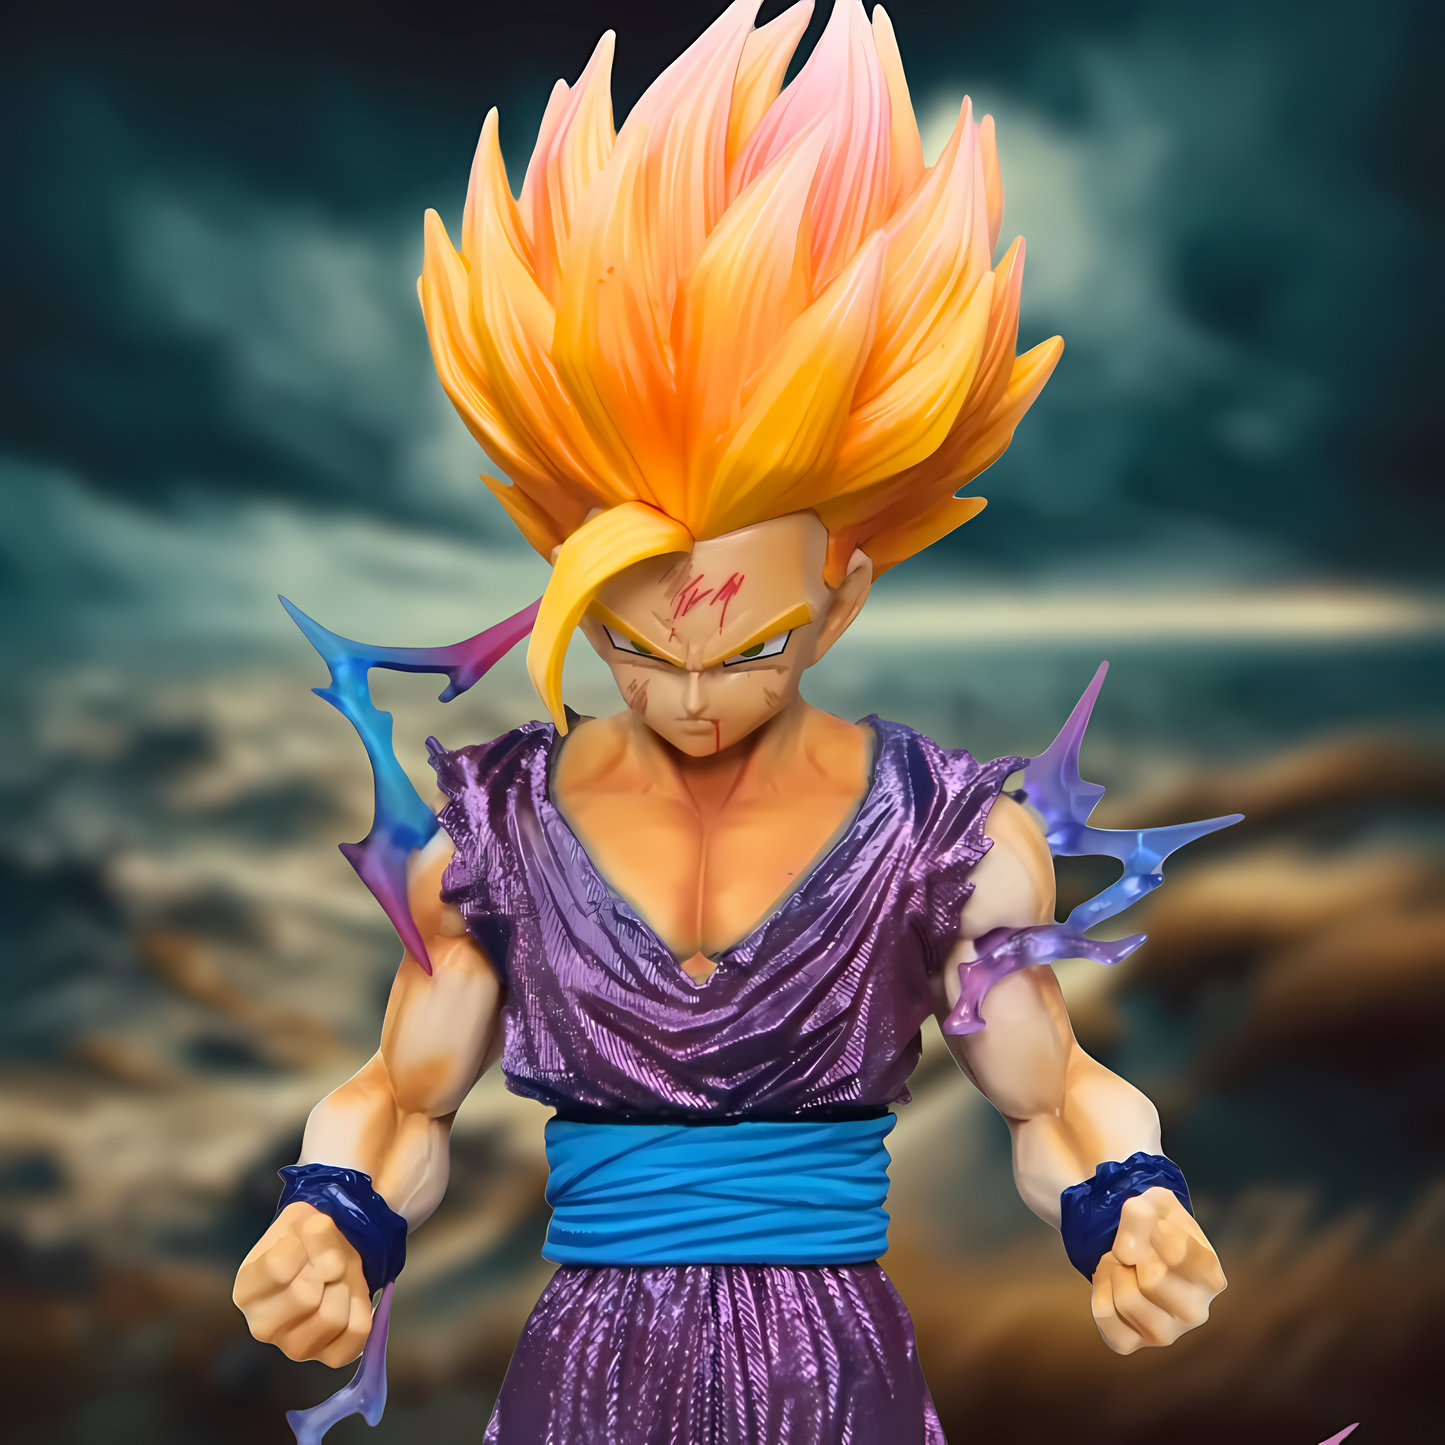 Intense close-up of Super Saiyan Gohan's figure, focusing on his determined expression and spiky orange hair, set against a blurred stormy backdrop.